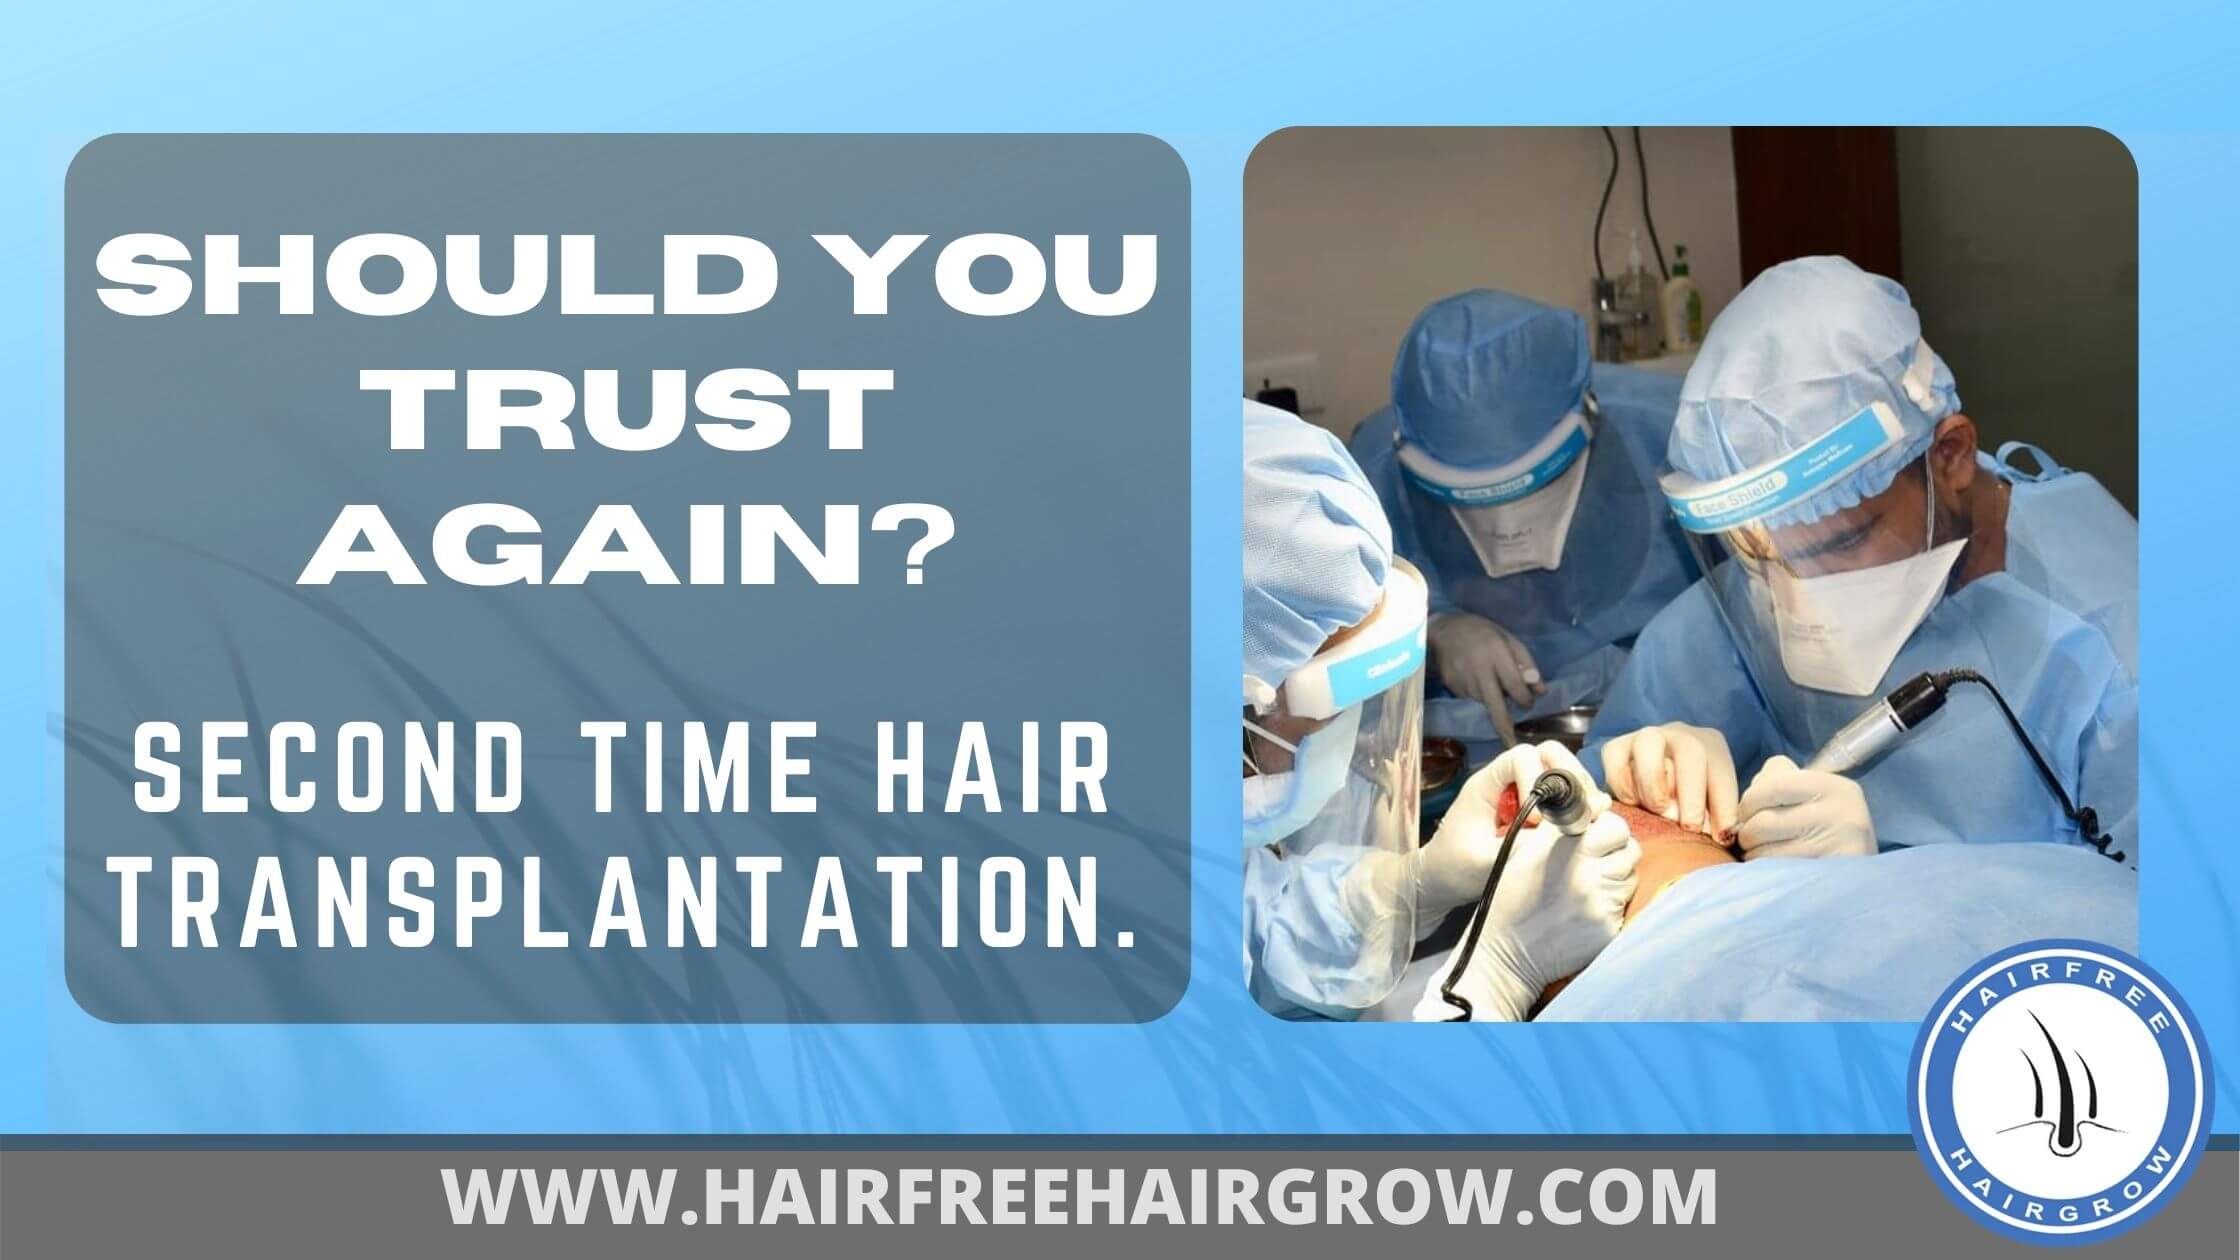 a team of 3 best hair transplant doctors doing hair transplant procedure on a lying patient